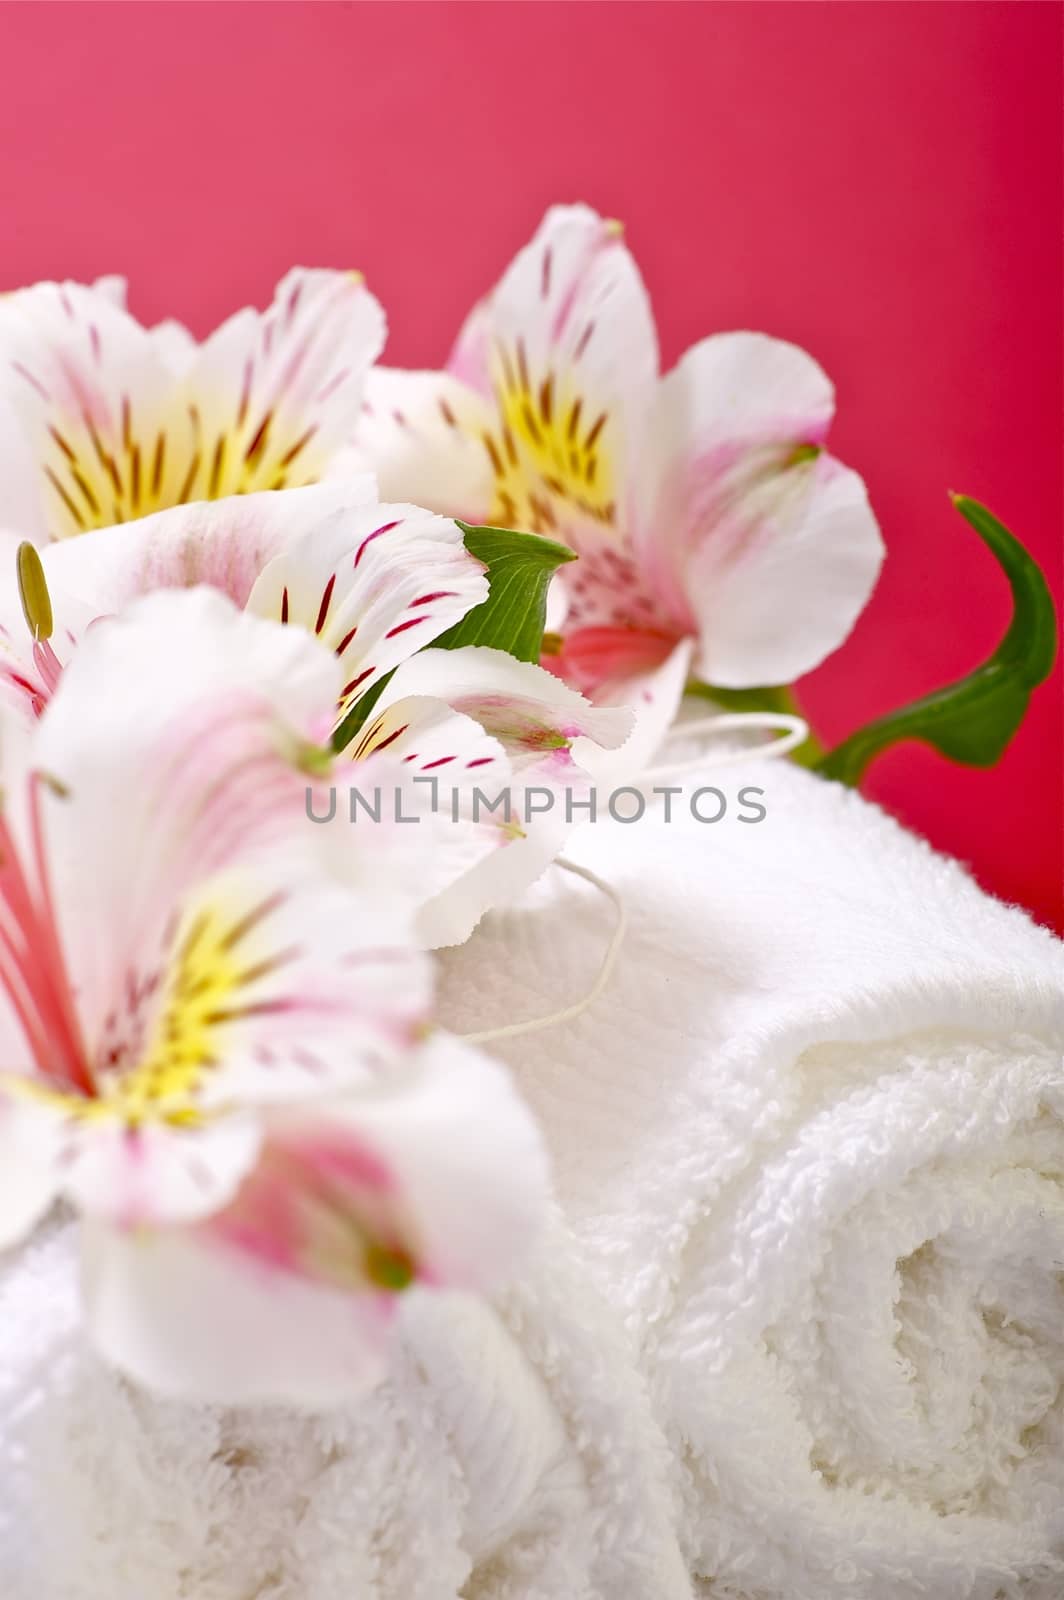 Flowers and Towels by welcomia